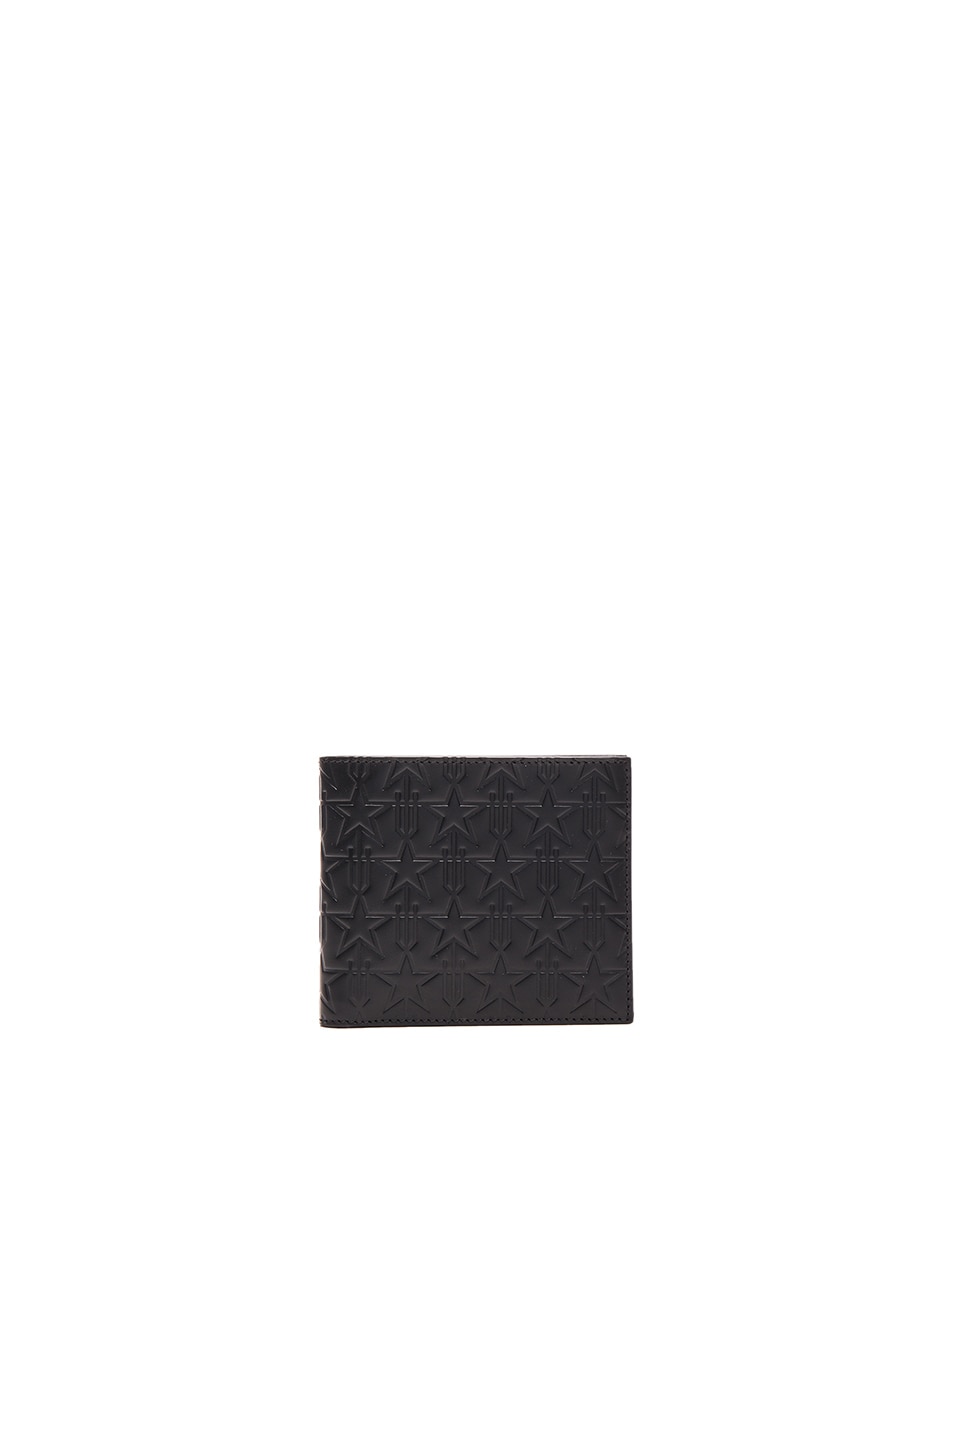 Image 1 of Givenchy Billfold Wallet in Black